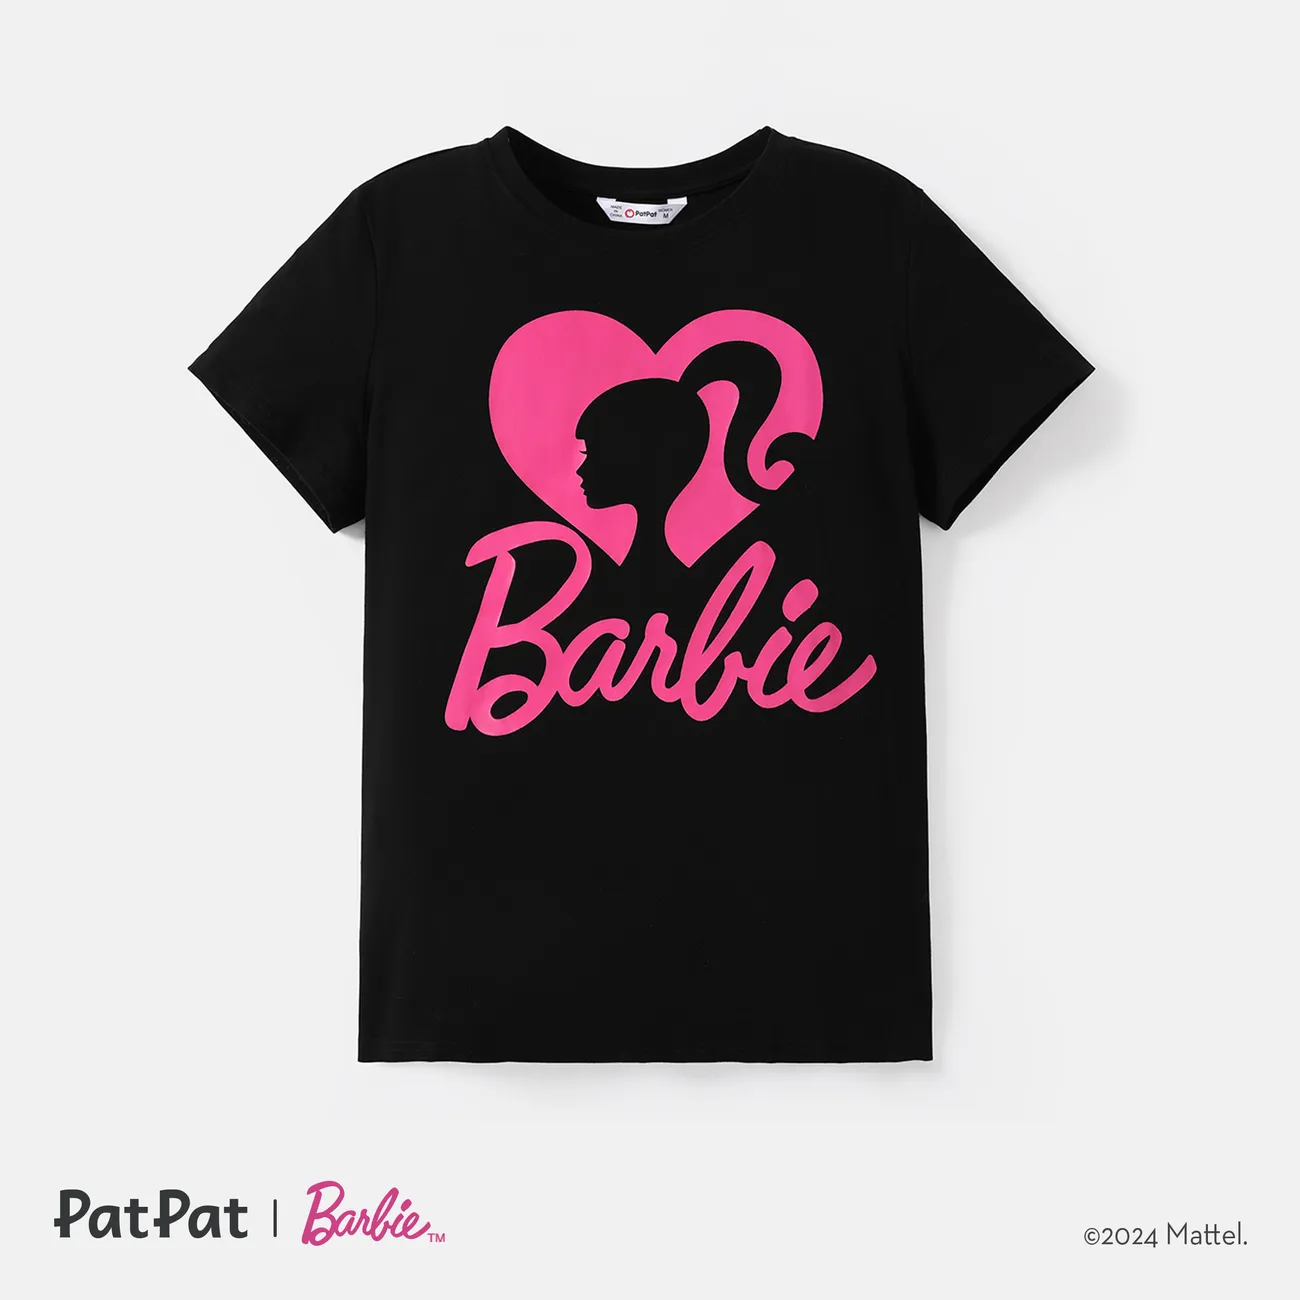 Barbie Mommy and Me Cotton Short-sleeve Heart & Letter Print Short-sleeve T-shirts Black big image 1